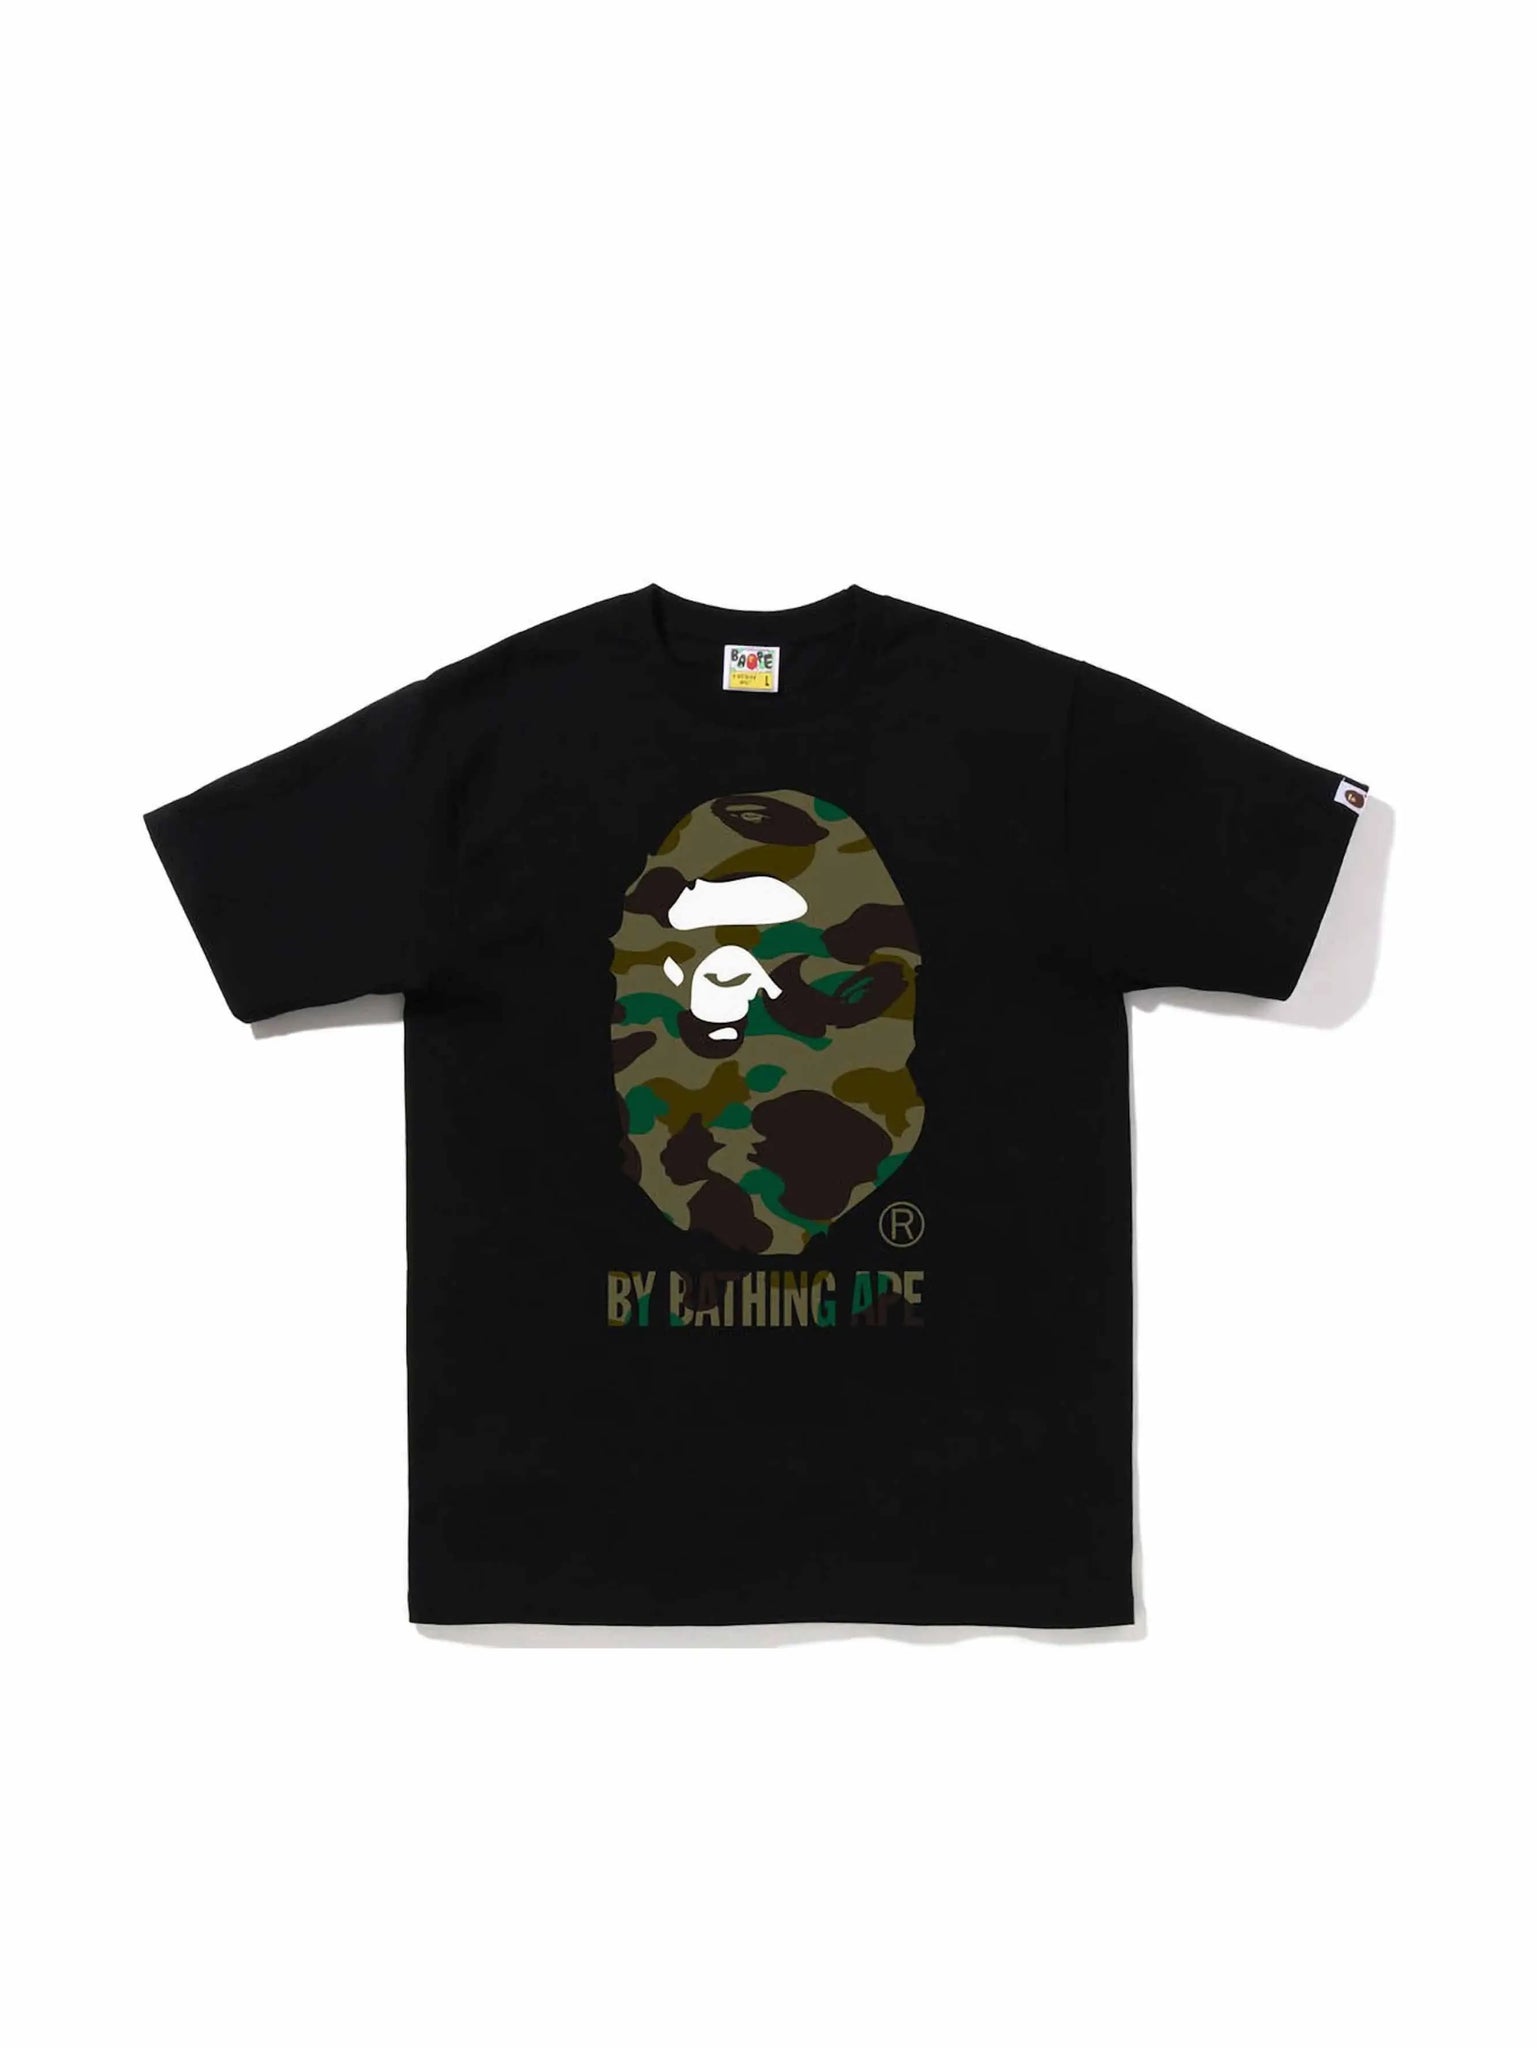 A Bathing Ape 1st Camo By Bathing Ape Tee (FW22) Black Green in Auckland, New Zealand - Shop name